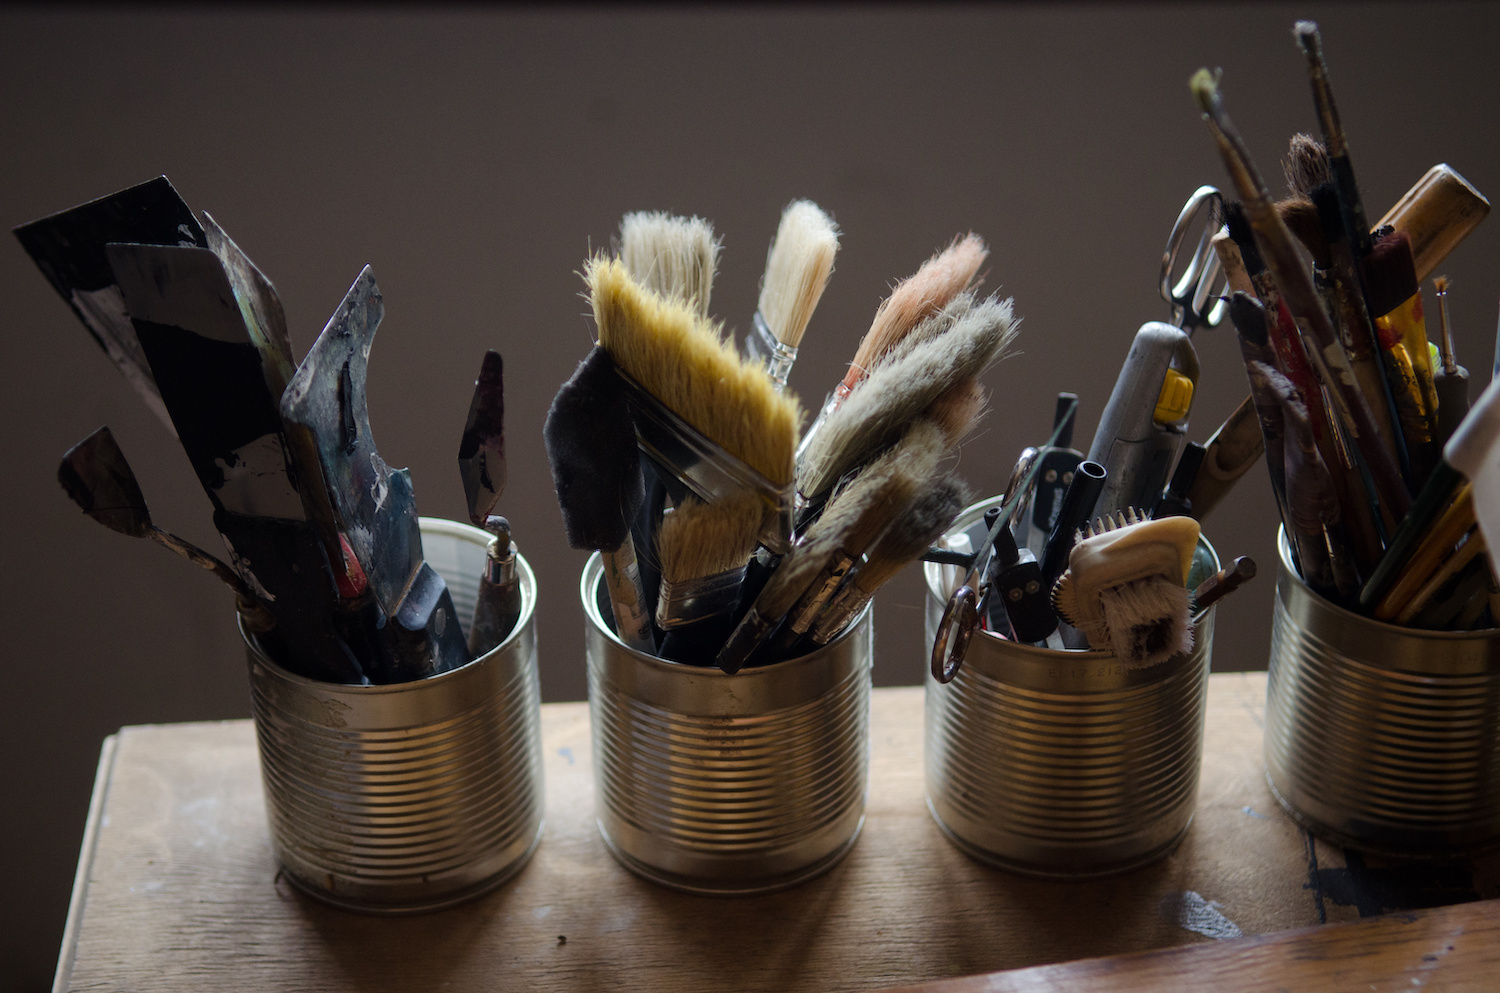 Brushes, pencils and other drawing tools are collected in three jars on the table in the artist's studio